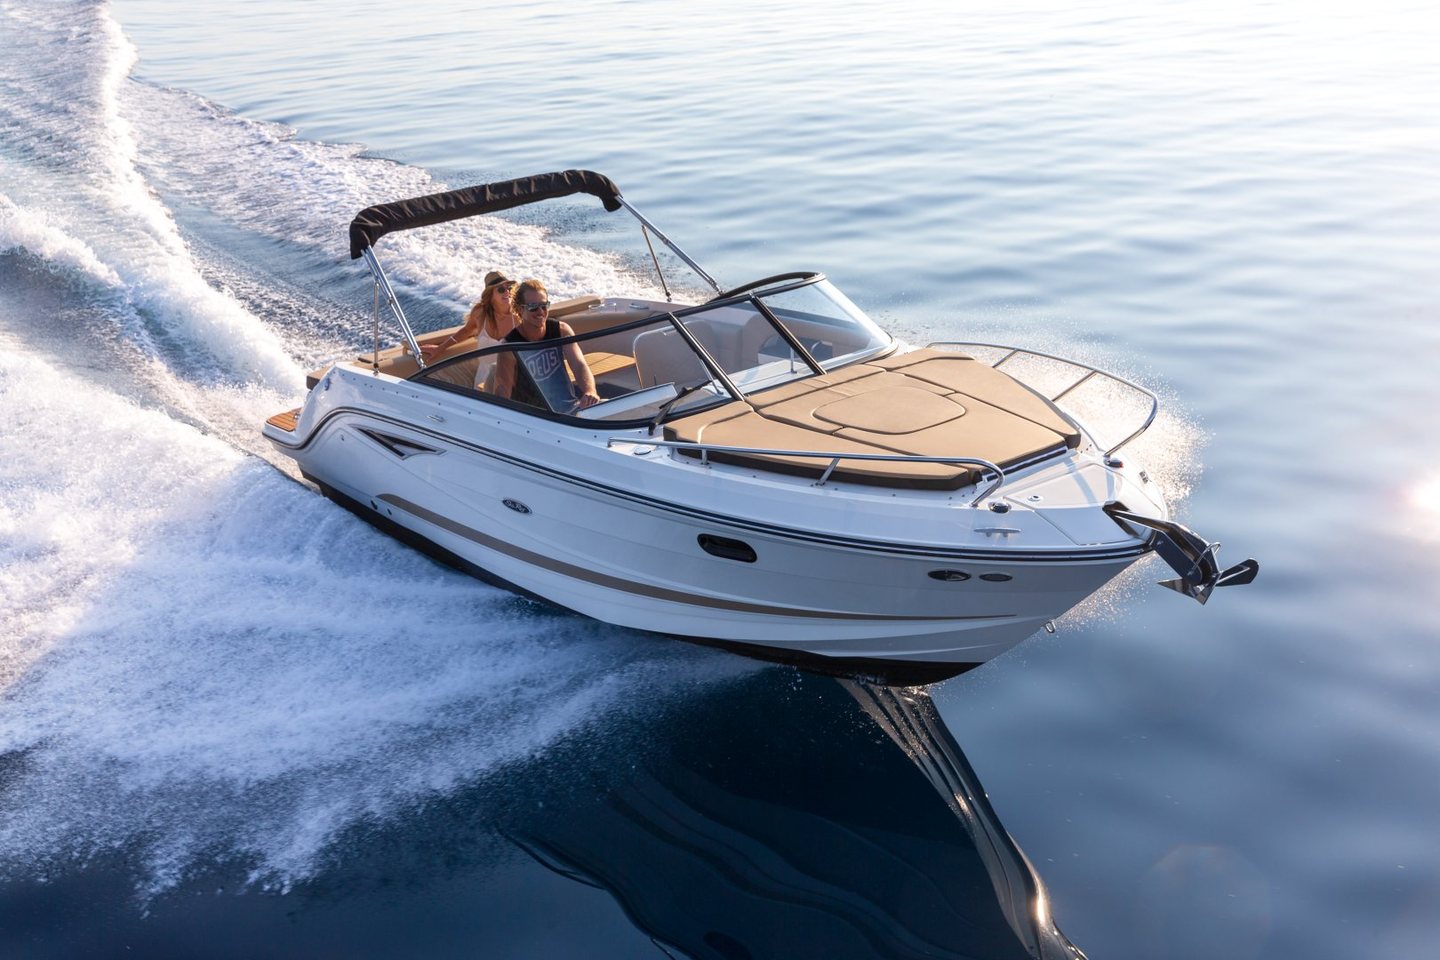 360 VR Virtual Tours of the Sea Ray Sun Sport 250